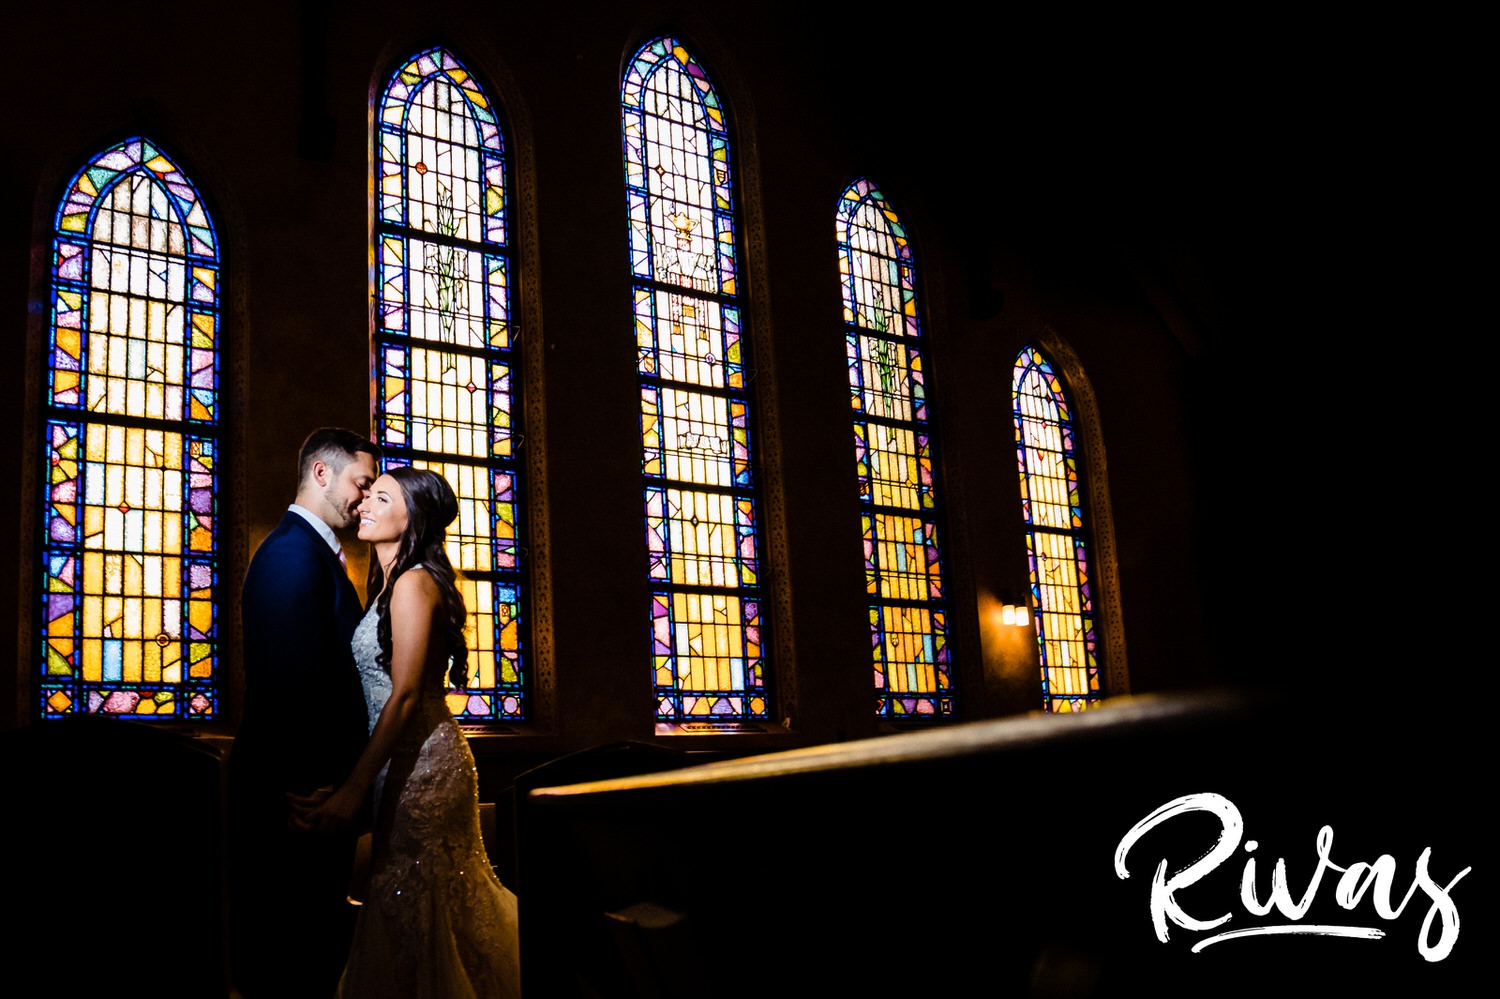 A bright, dramatic portrait of a bride and groom sharing a kiss in front of yellow stained glass windows on their wedding day.